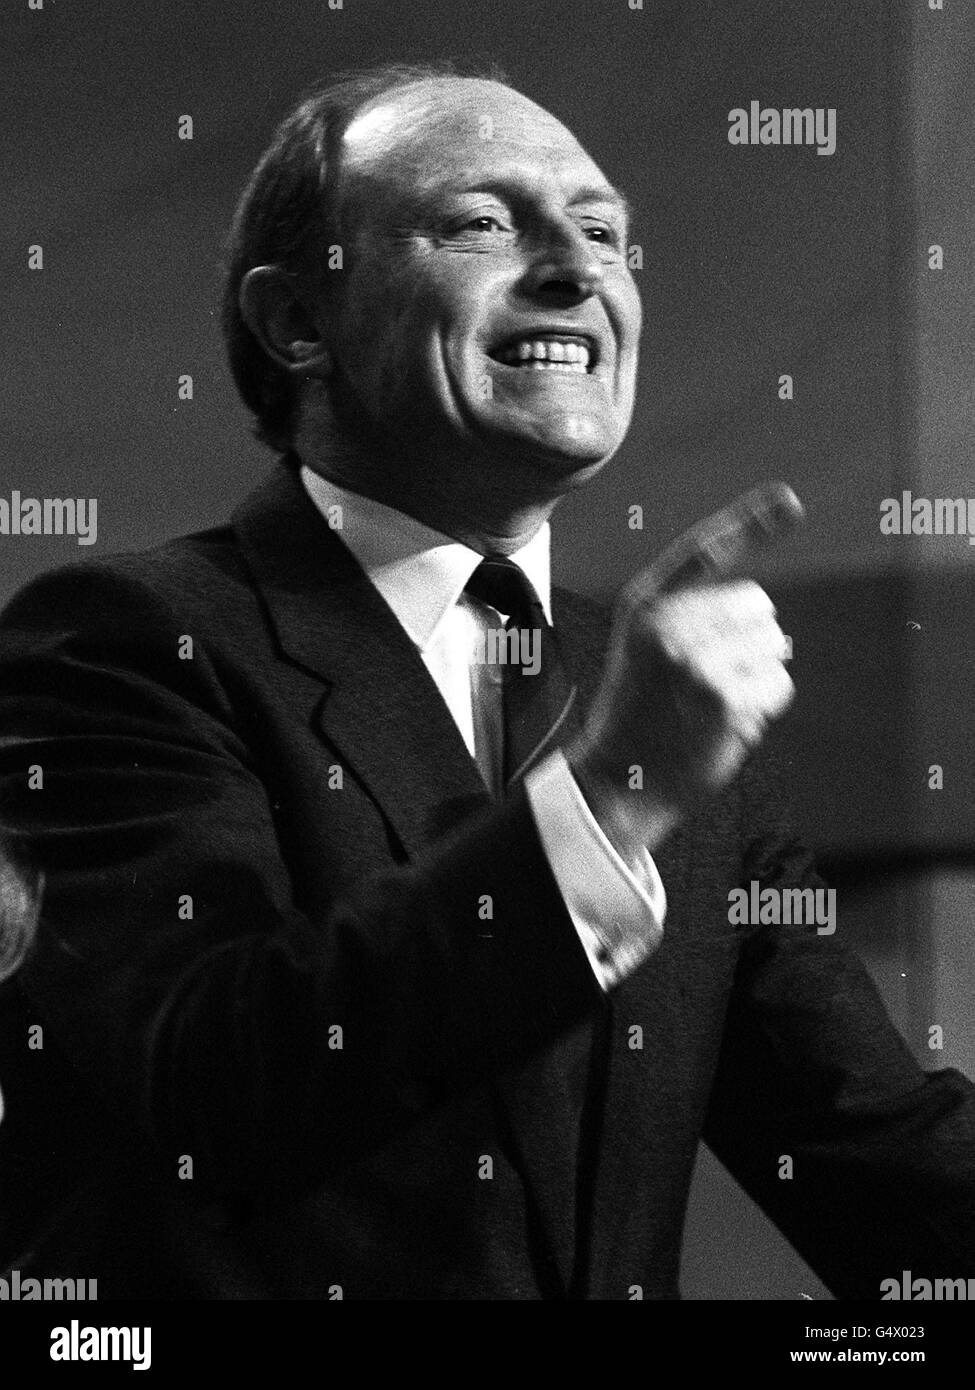 Labour leader Neil Kinnock in a second passsionate speech to conference. Mr Kinnock declared that it would be 'utterly dishonest' to pledge that a future Labour government would repay all the court fines incurred by the Miners Union in its year-long strike. PA NEWS PHOTO 2/10/85 LABOUR PARTY LEADER NEIL KINNOCK IN HIS SECOND PASSIONATE SPEECH OF THE LABOUR PARTY CONFERENCE. Stock Photo